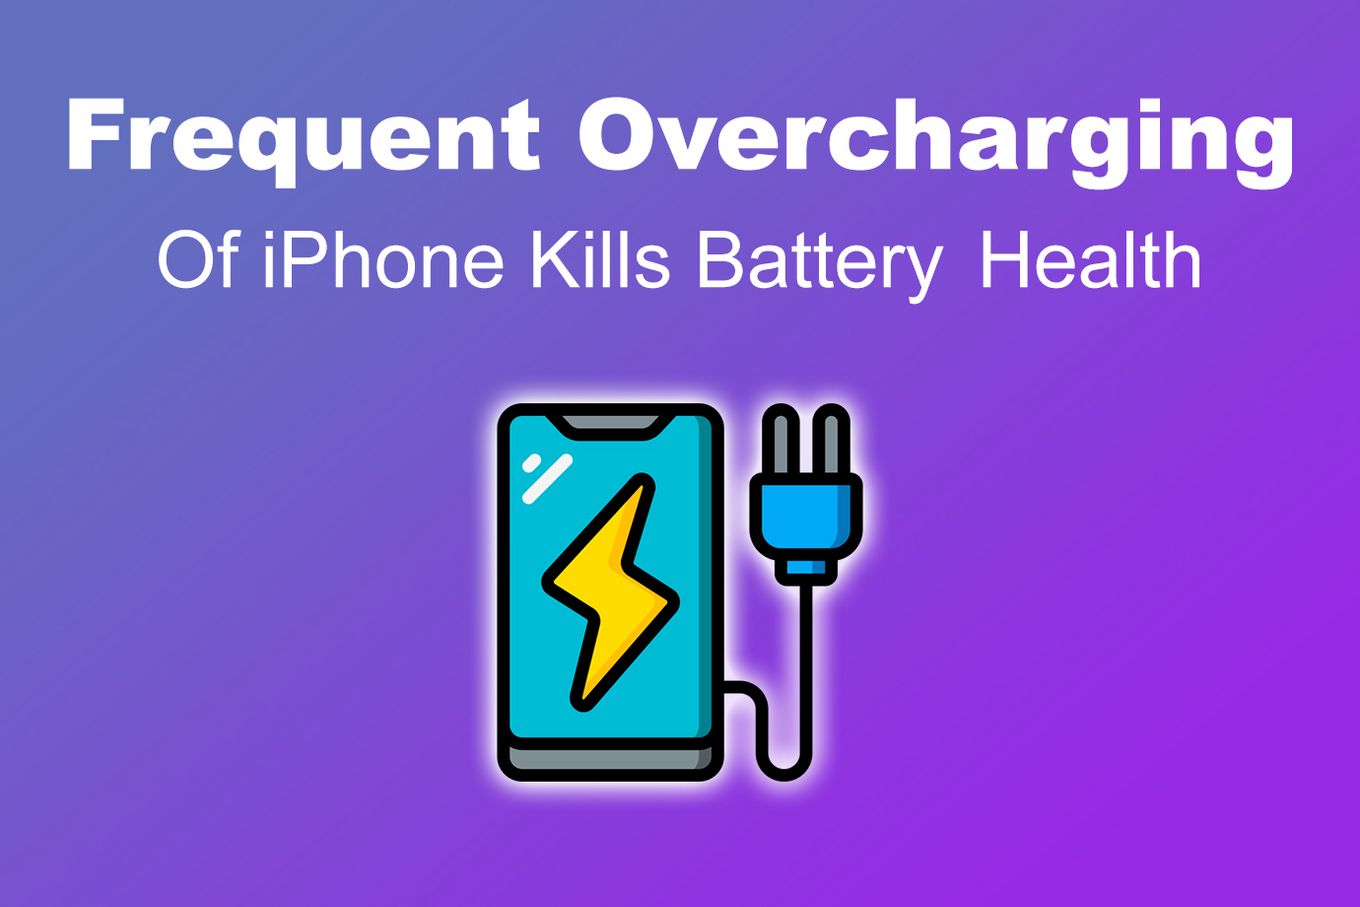 Frequent Overcharging of iPhone Kills Battery Health